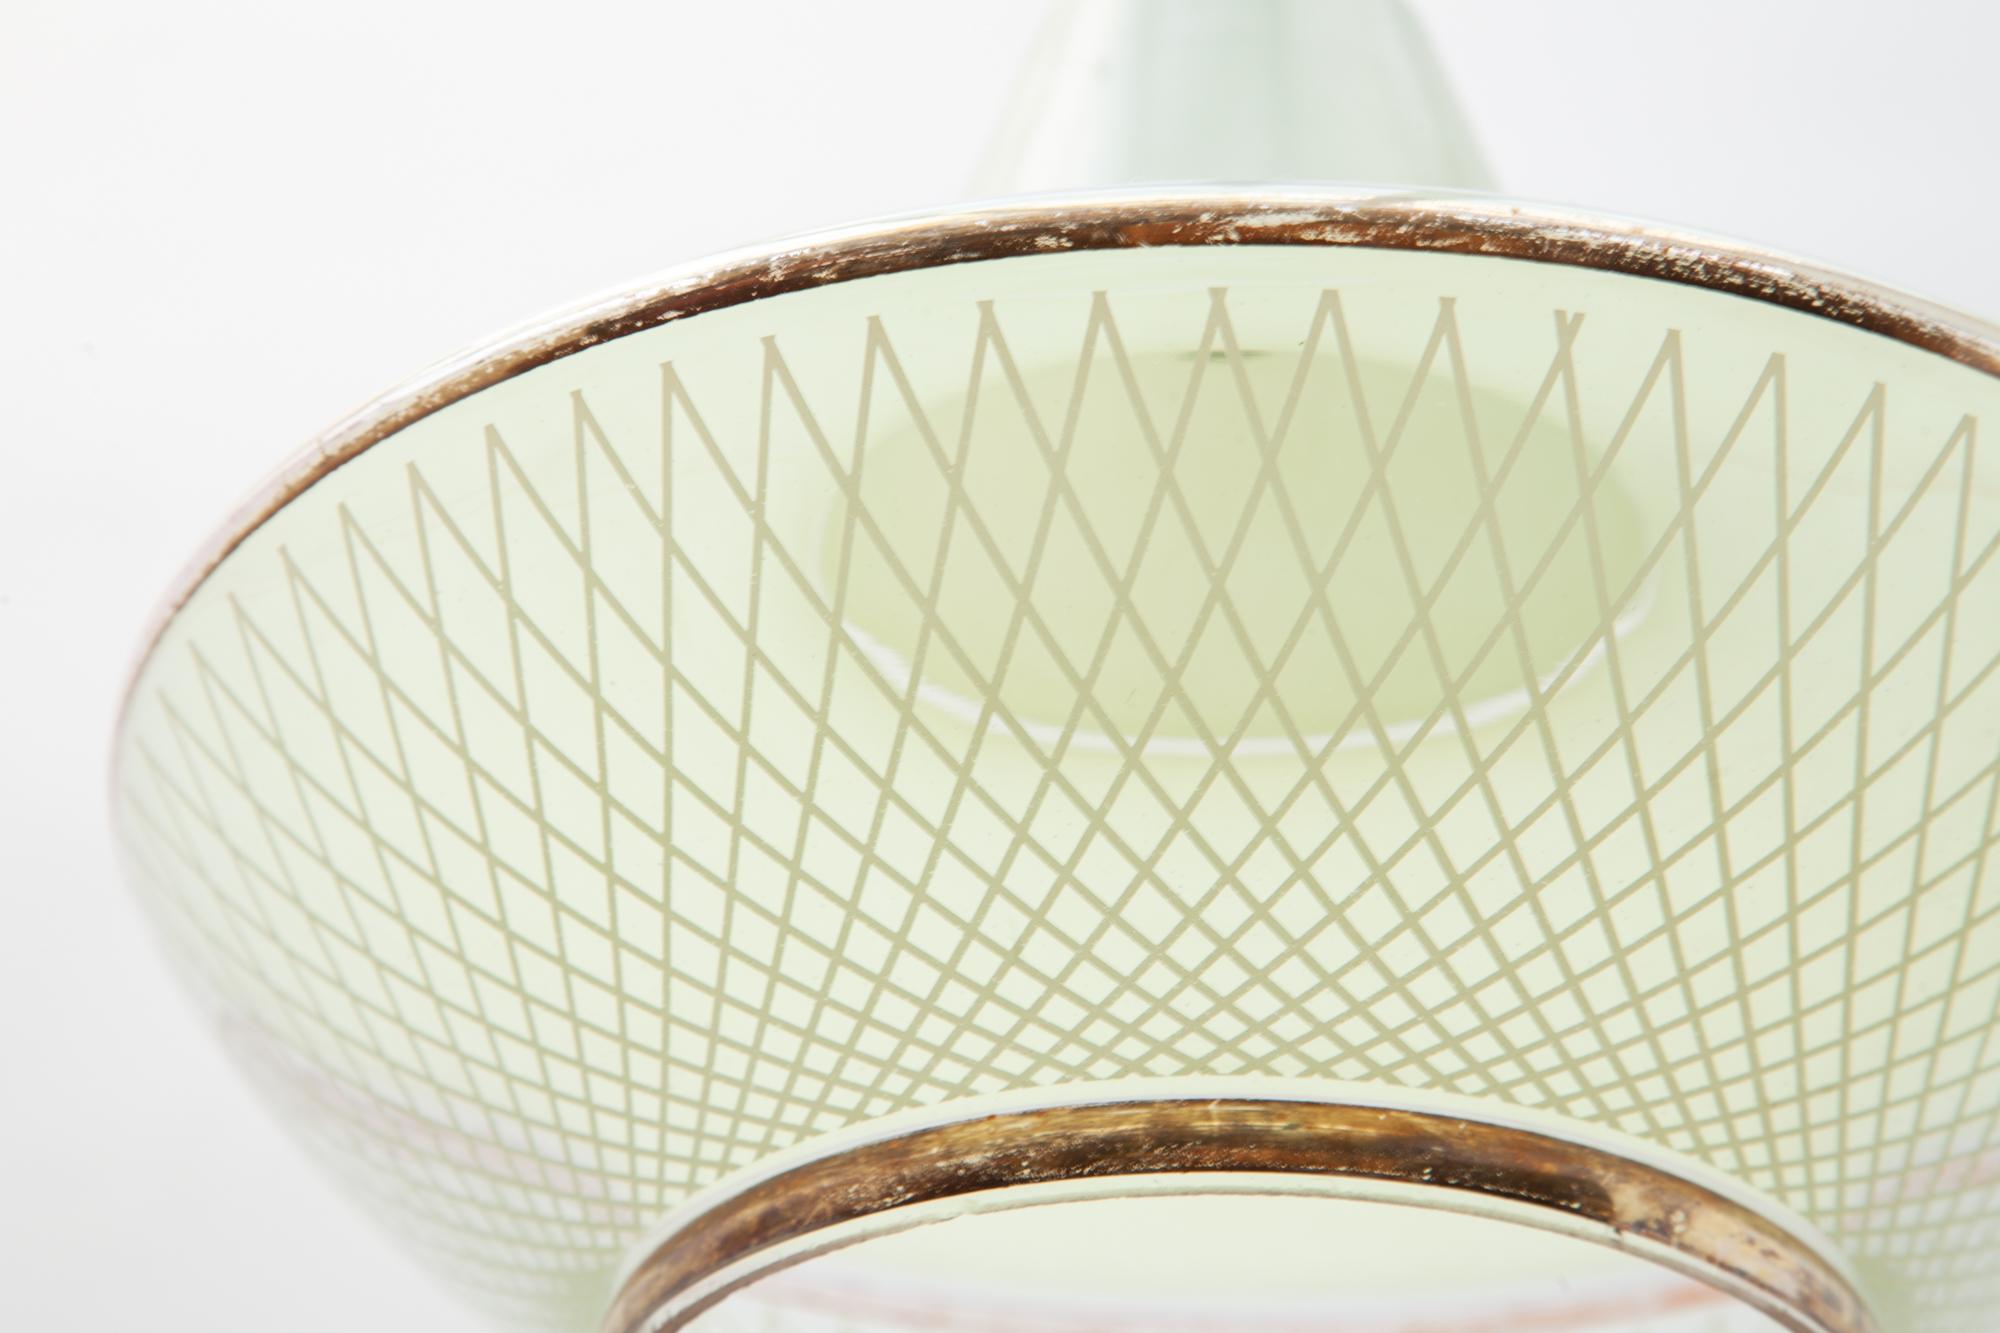 Midcentury pendant light. Made of glass with enamel painted design in pastel yellow with gold accents made by the Belgium glass manufacture Boom.